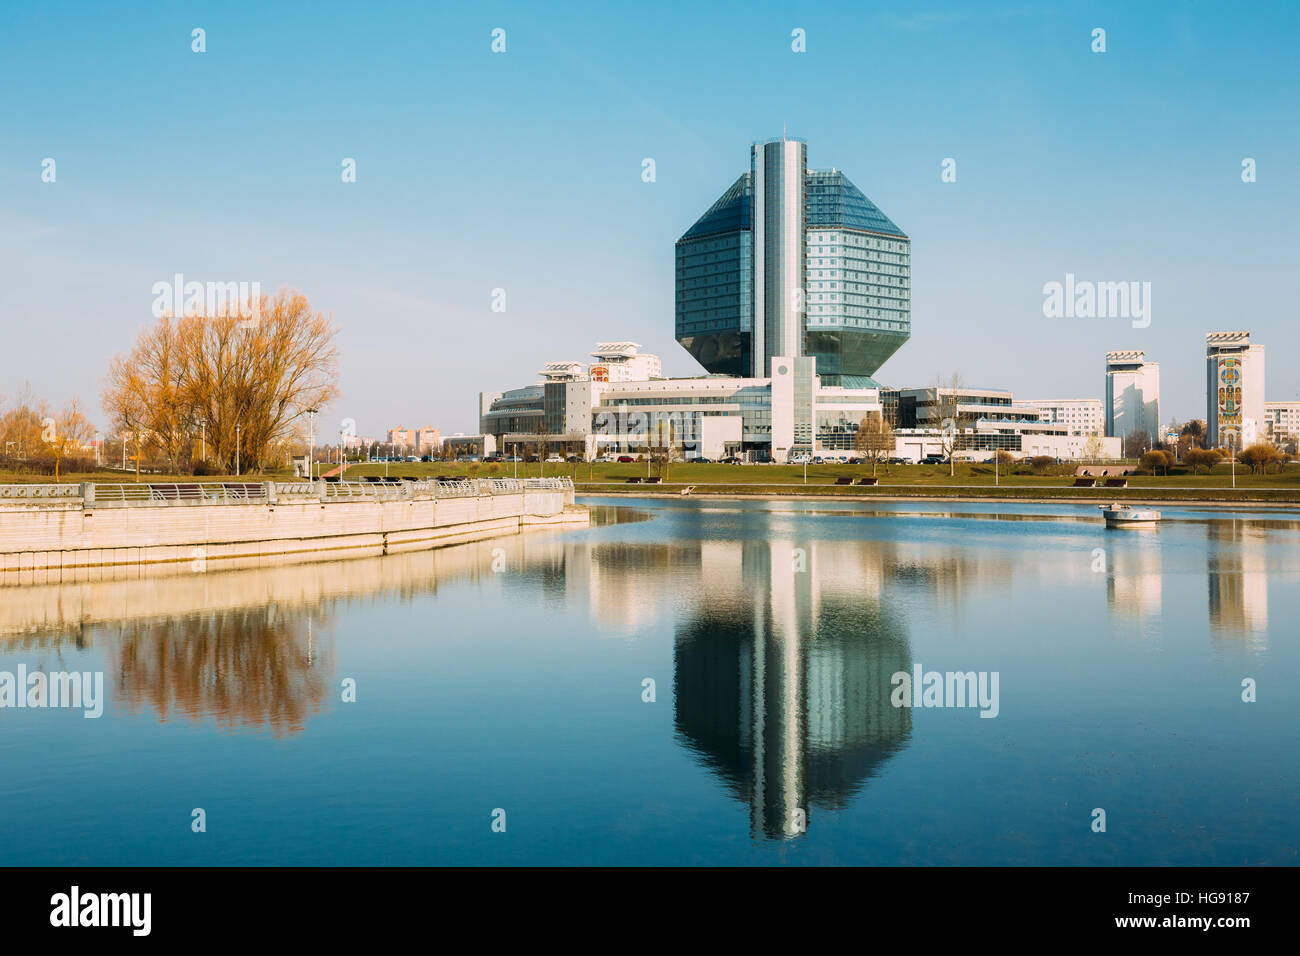 Minsk, Belarus. Building Of National Library Of Belarus In Minsk. Famous Symbol Of Modern Belarusian Culture And Science. Modern Architecture Stock Photo